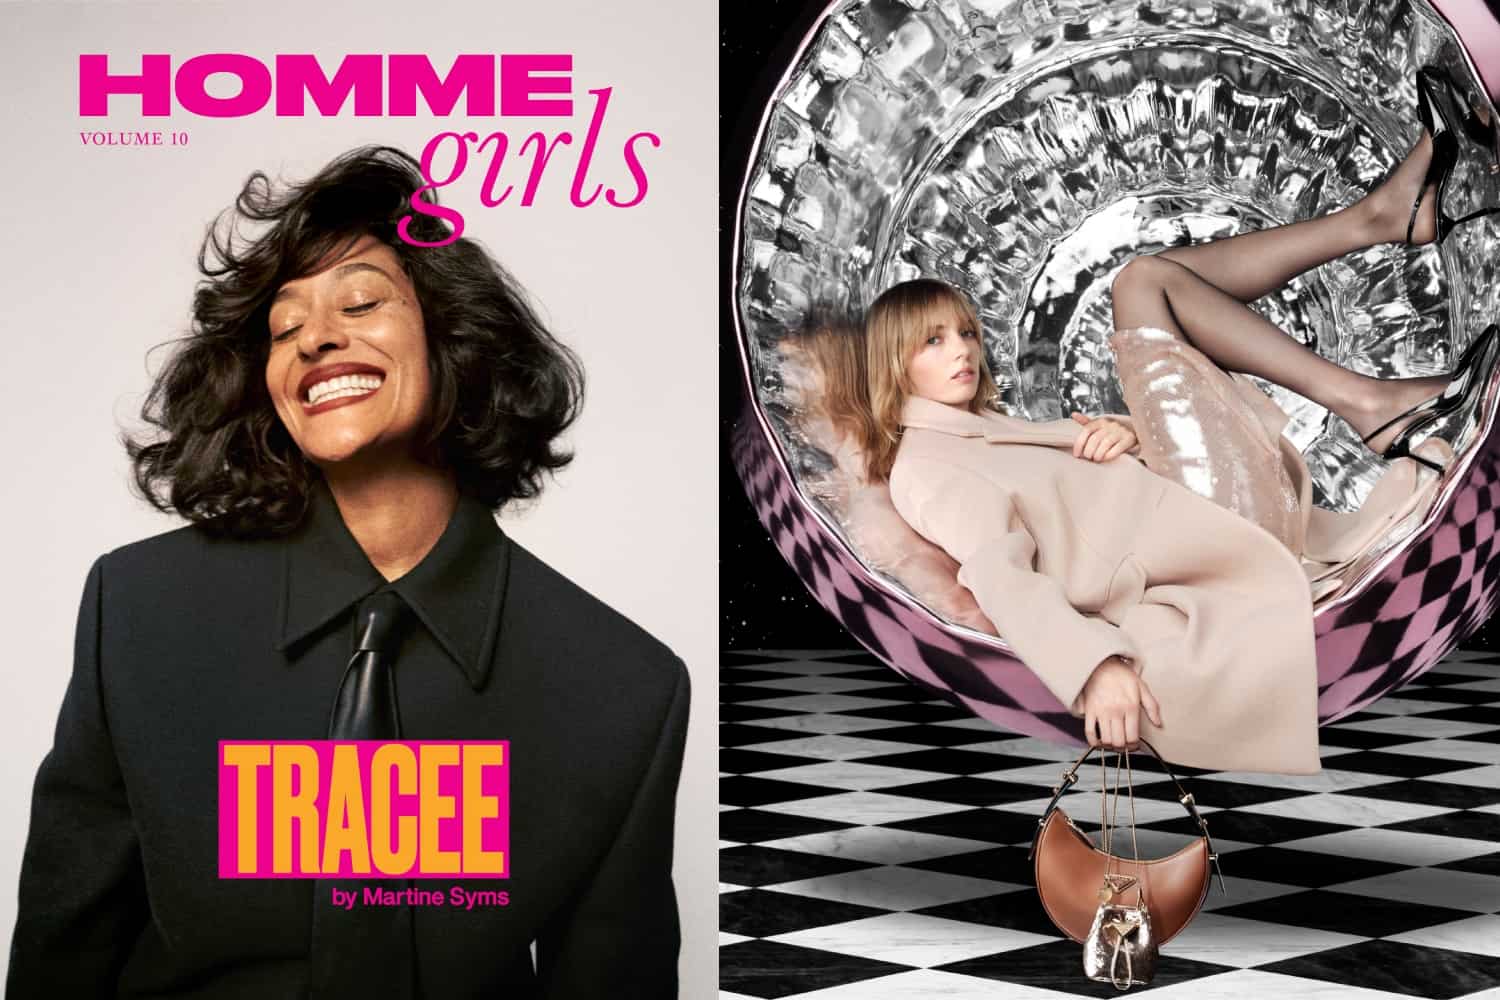 More Intel On Kylie Jenner’s Khy, Tracee Ellis Ross Covers Hommegirls, Prada’s Holiday Campaign, SIR Launches Jewelry, And More!